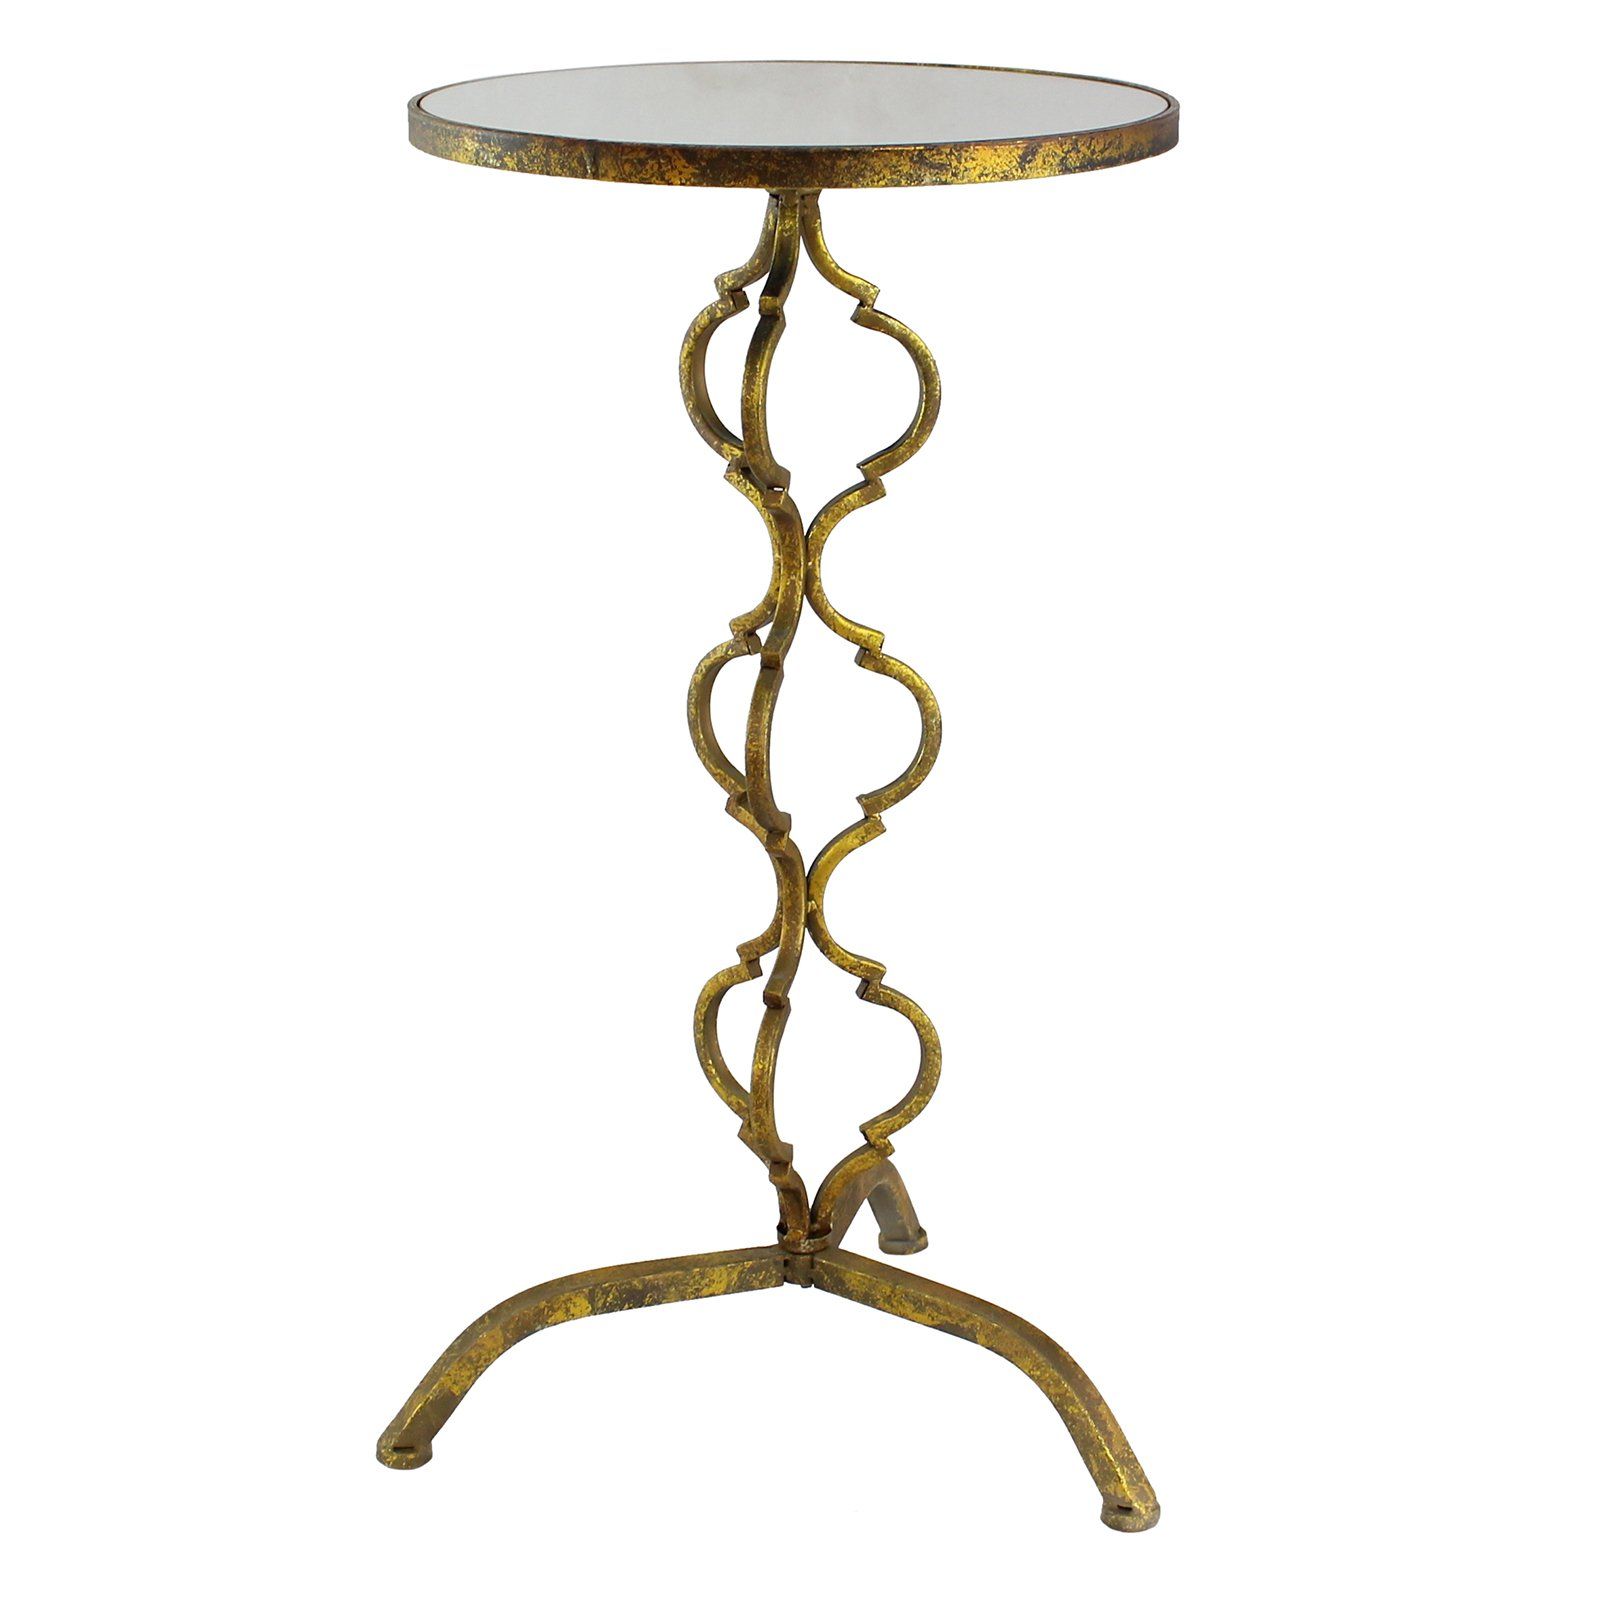 aspire home accents myra gold metal accent table products pedestal three dimensional ogee designs create the base this wood furniture sofa plans childs drum stool modern round